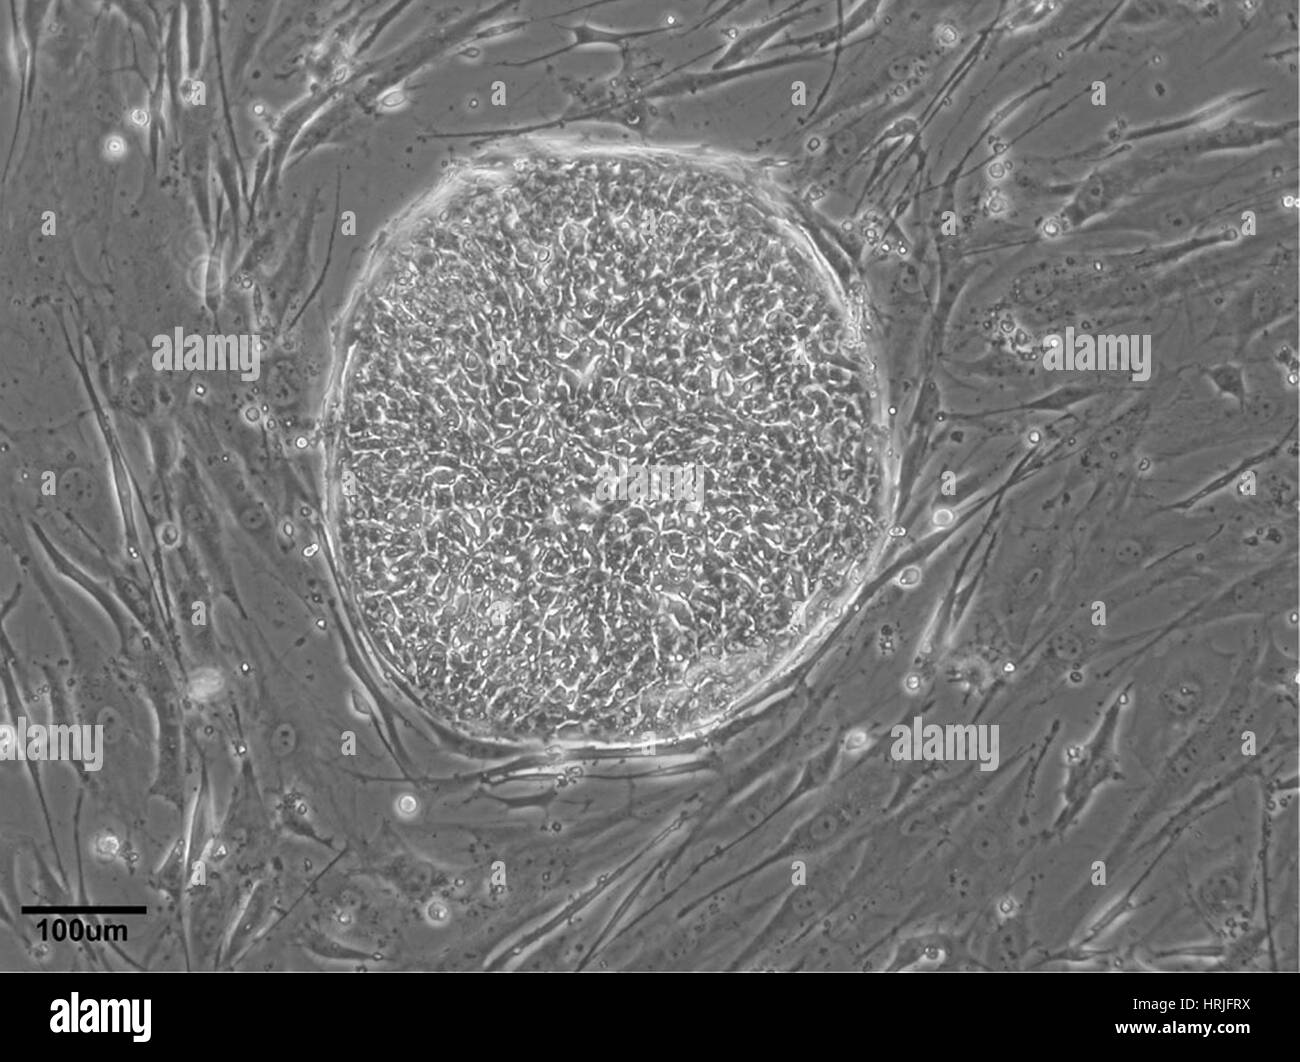 Human Embryonic Stem Cell Line UC06 Stock Photo